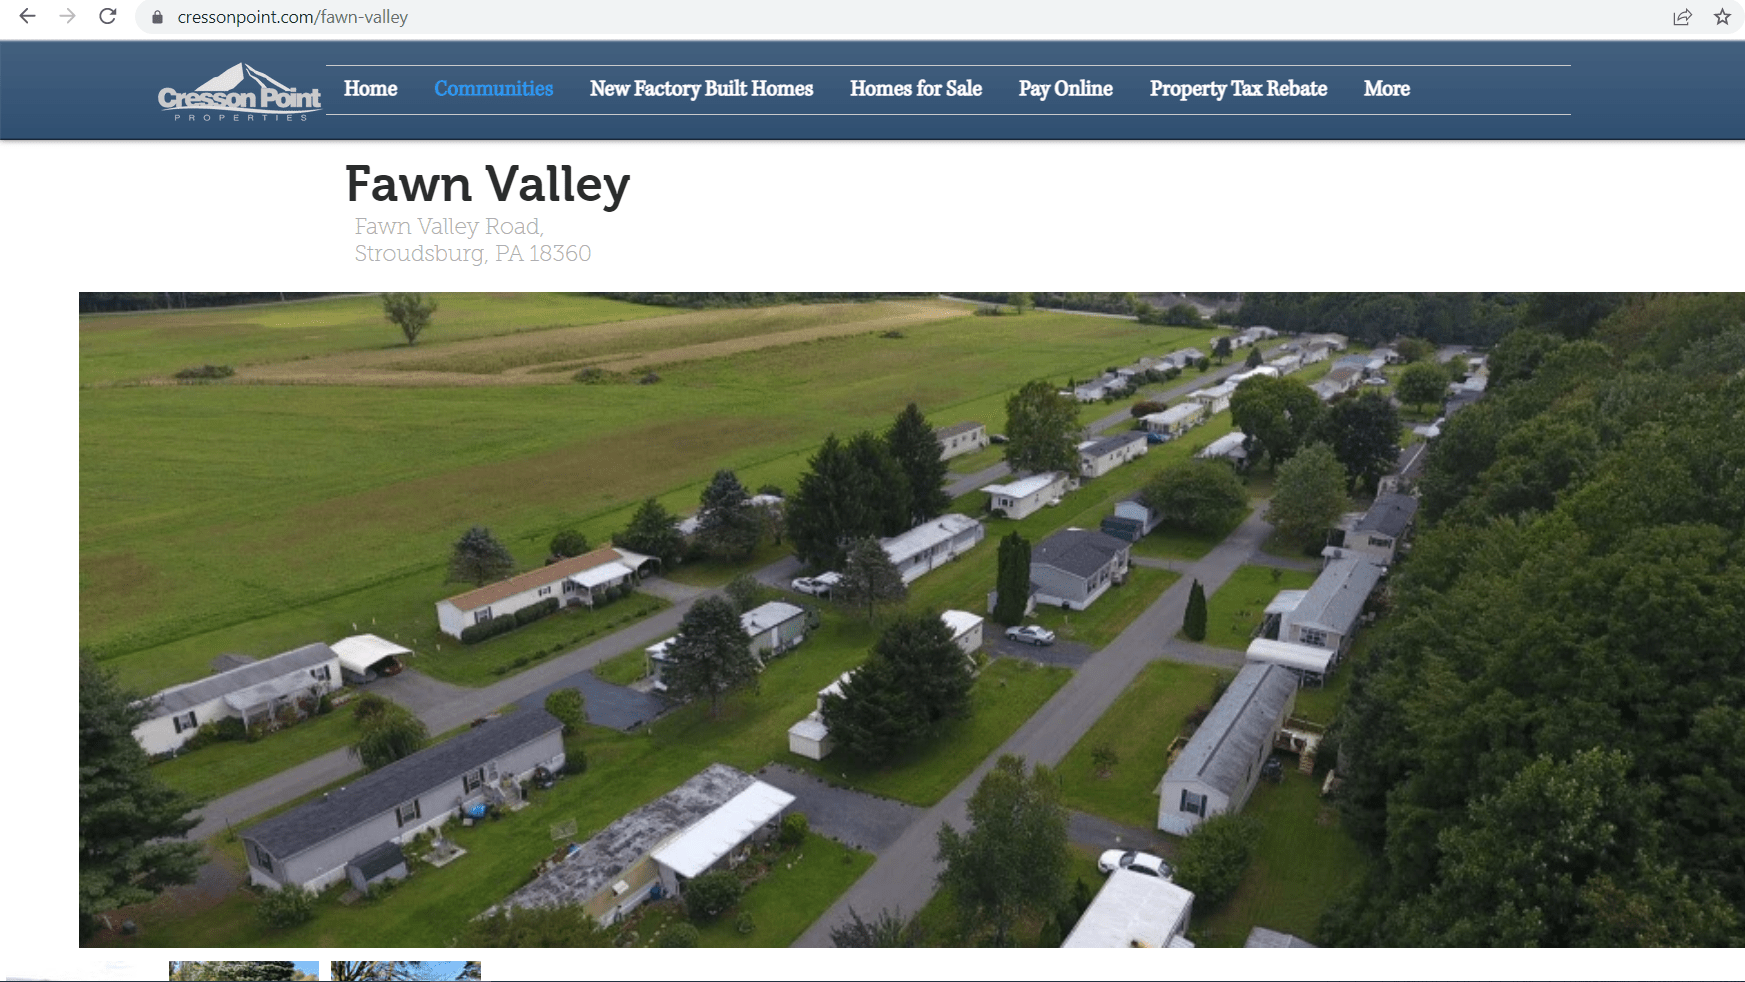 Fawn Valley (Stroudsburg, PA)